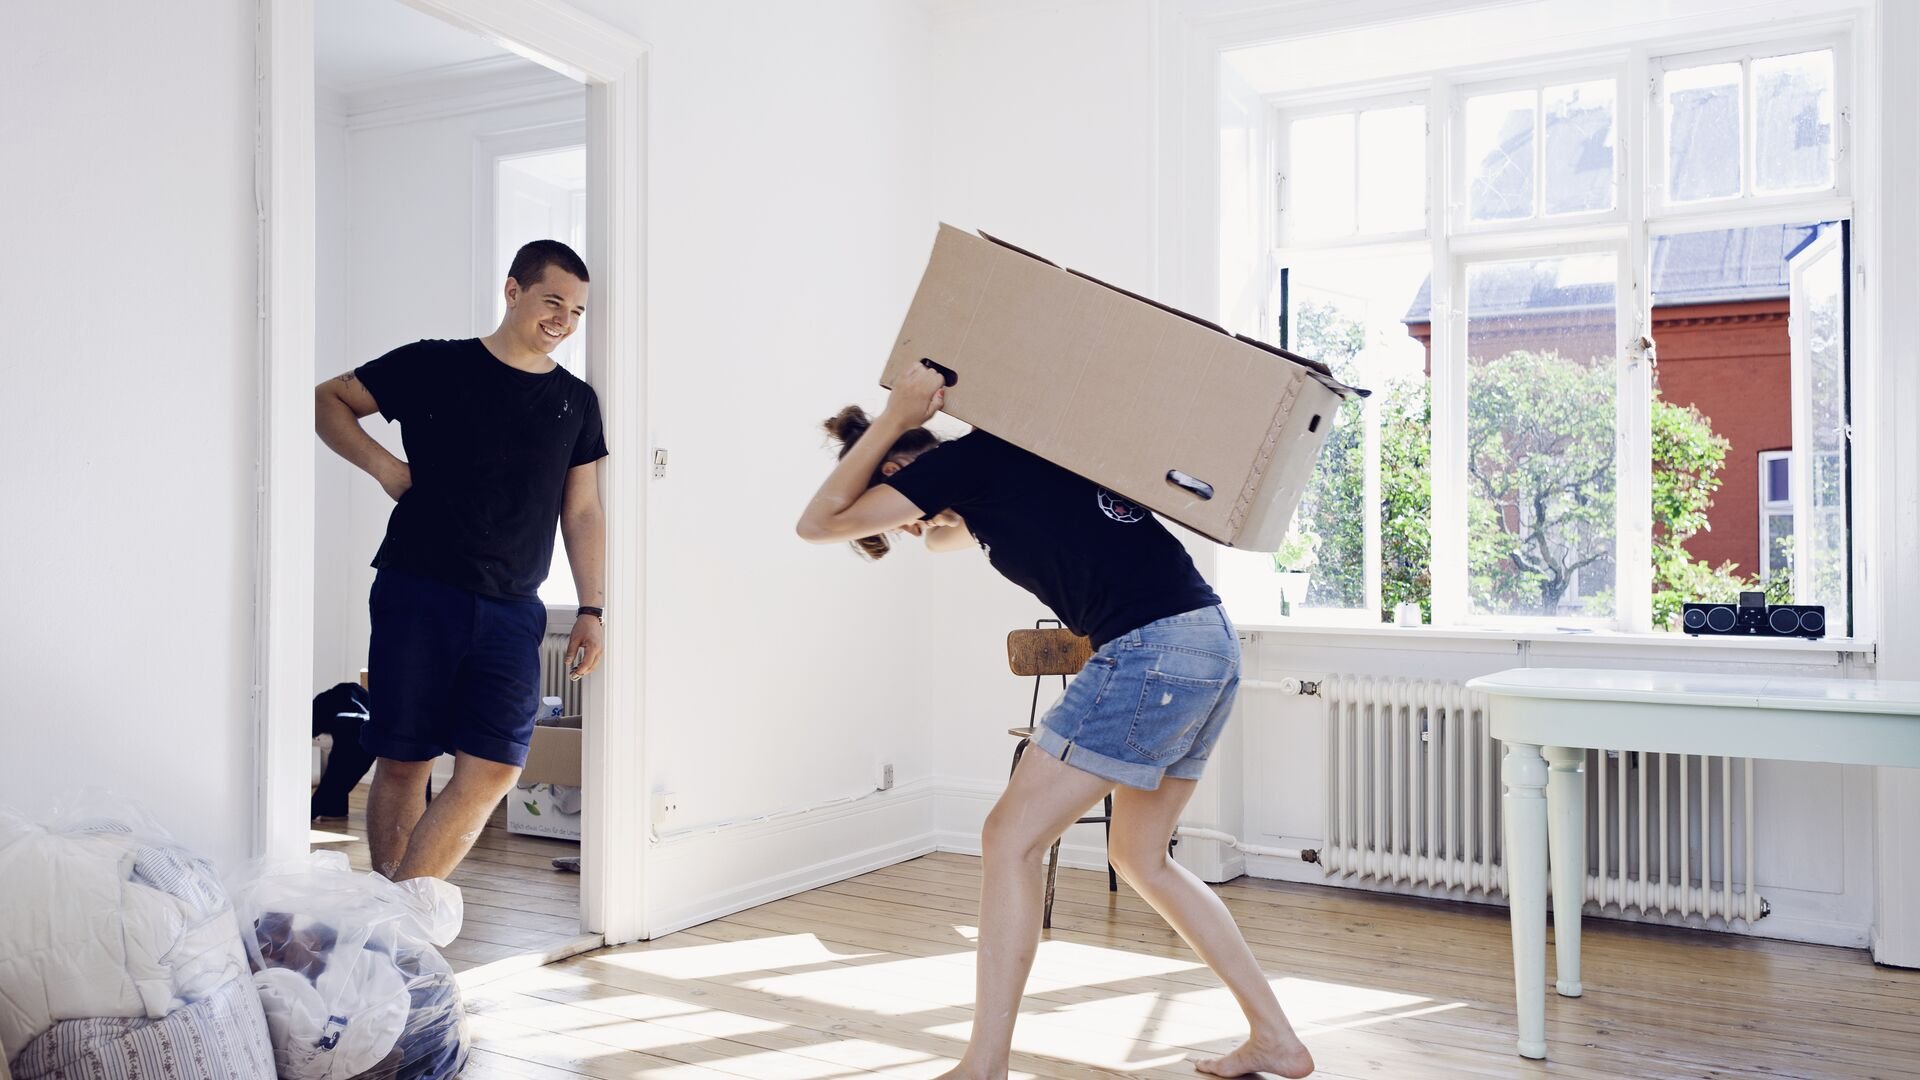 Man watching girlfriend carry heavy box in apartment